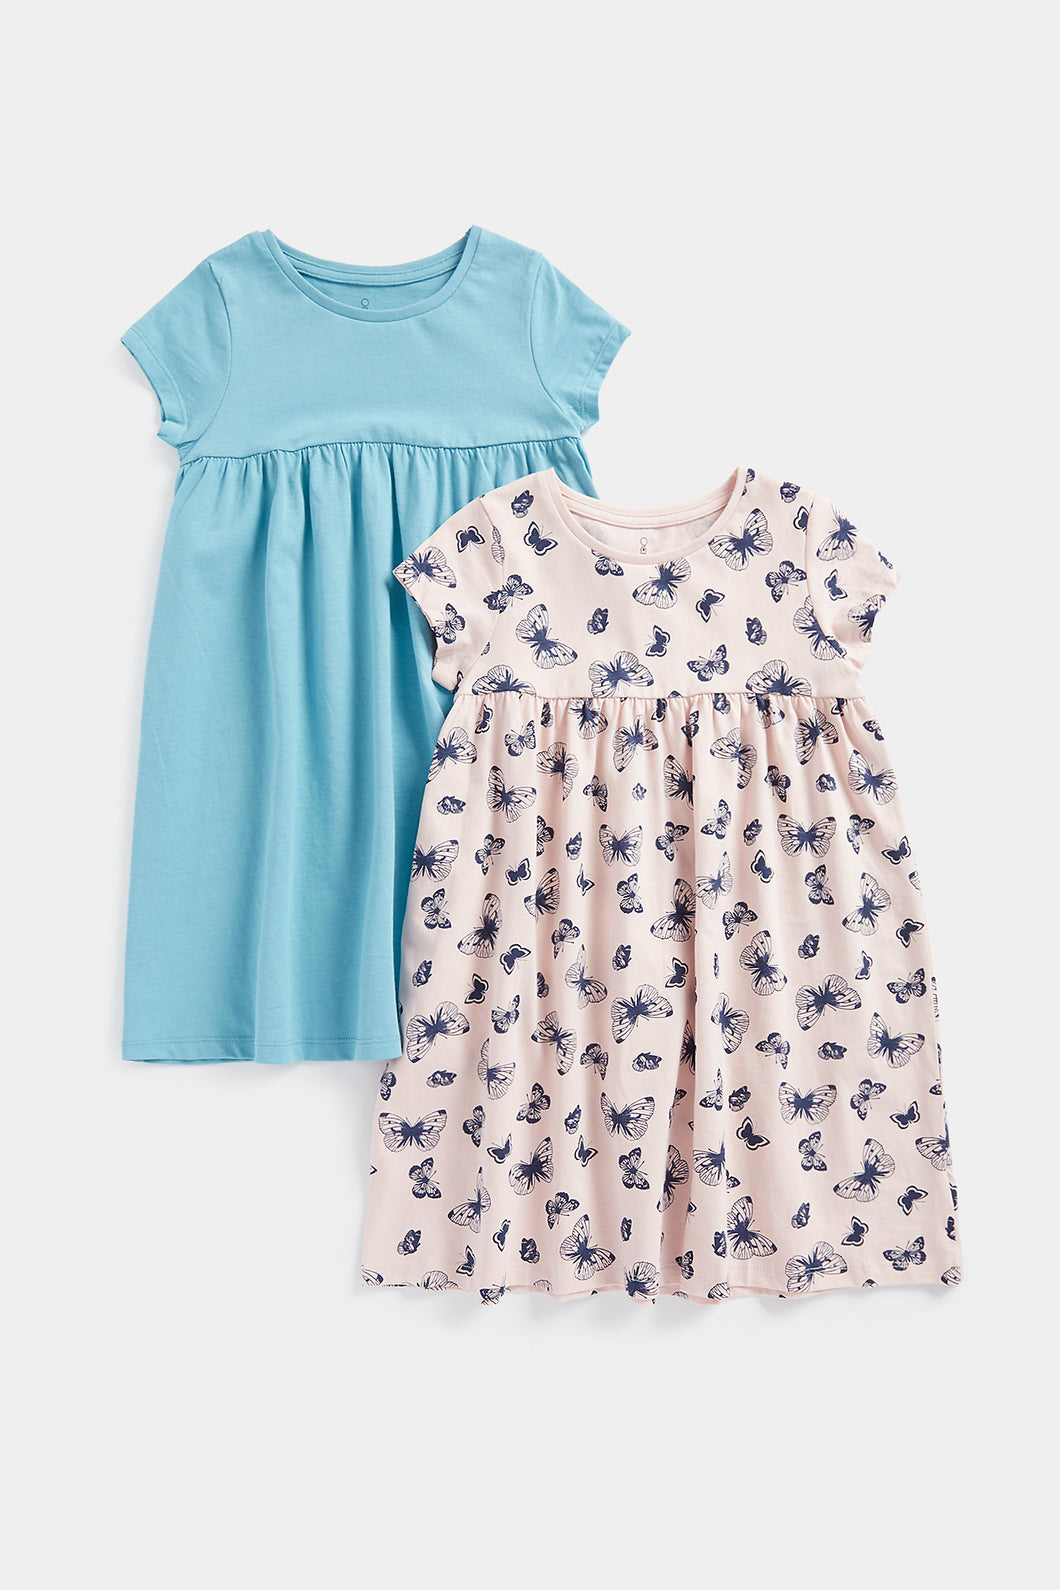 Mothercare Jersey Dresses - 2 Pack